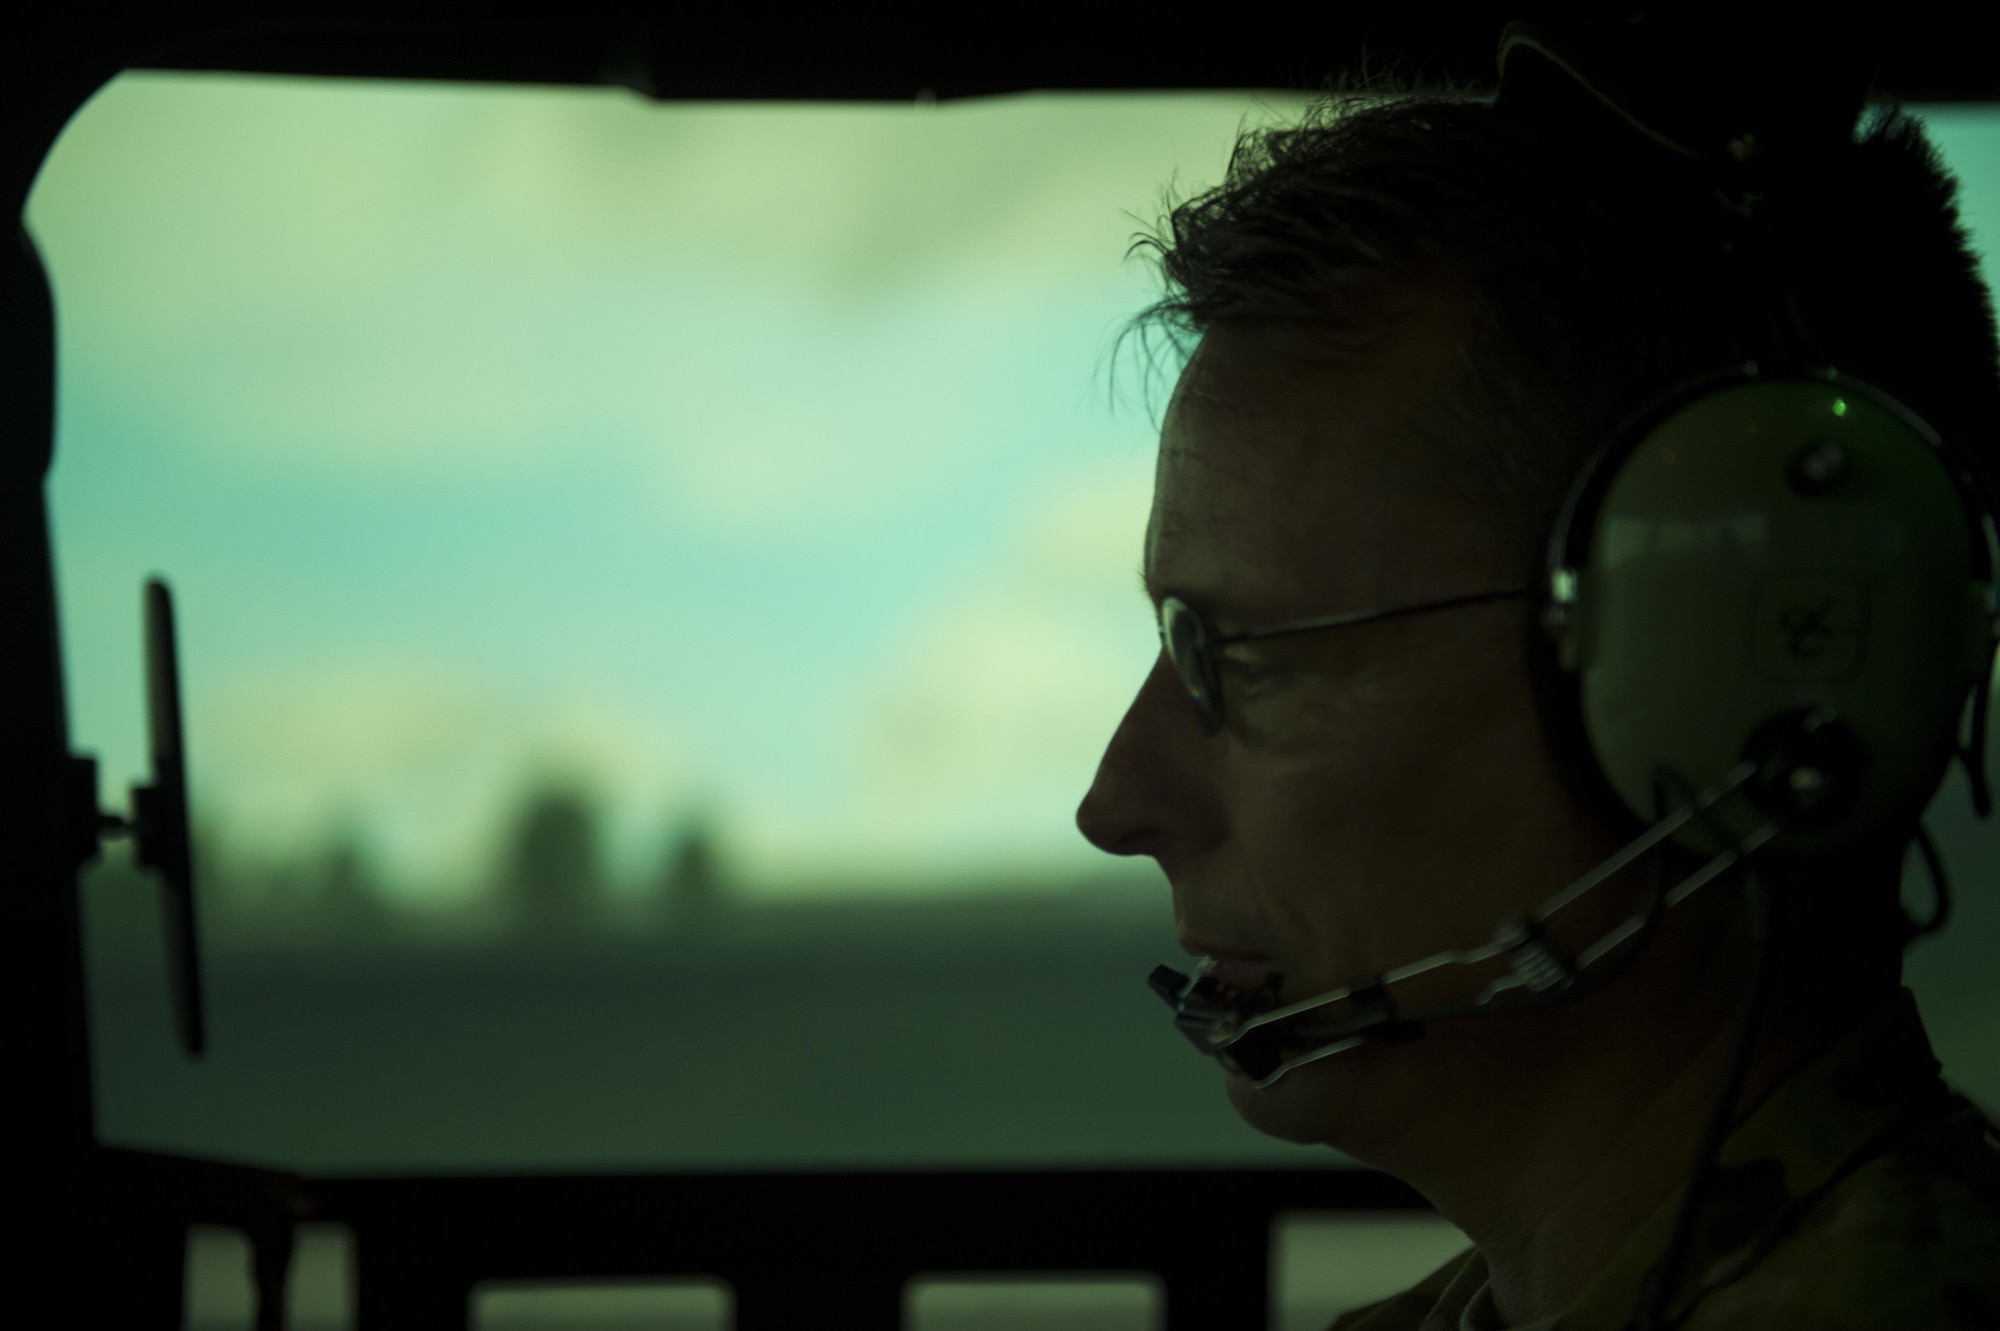 Col. Tom Palenske, vice commander of the 1st Special Operations Wing, flies a CV-22 Osprey training simulator at Hurlburt Field, Fla., June 8, 2016. Palenske took command of the 1st SOW during a change of command ceremony here, June 10, 2016. (U.S. Air Force Photo by Airman 1st Class Kai White)